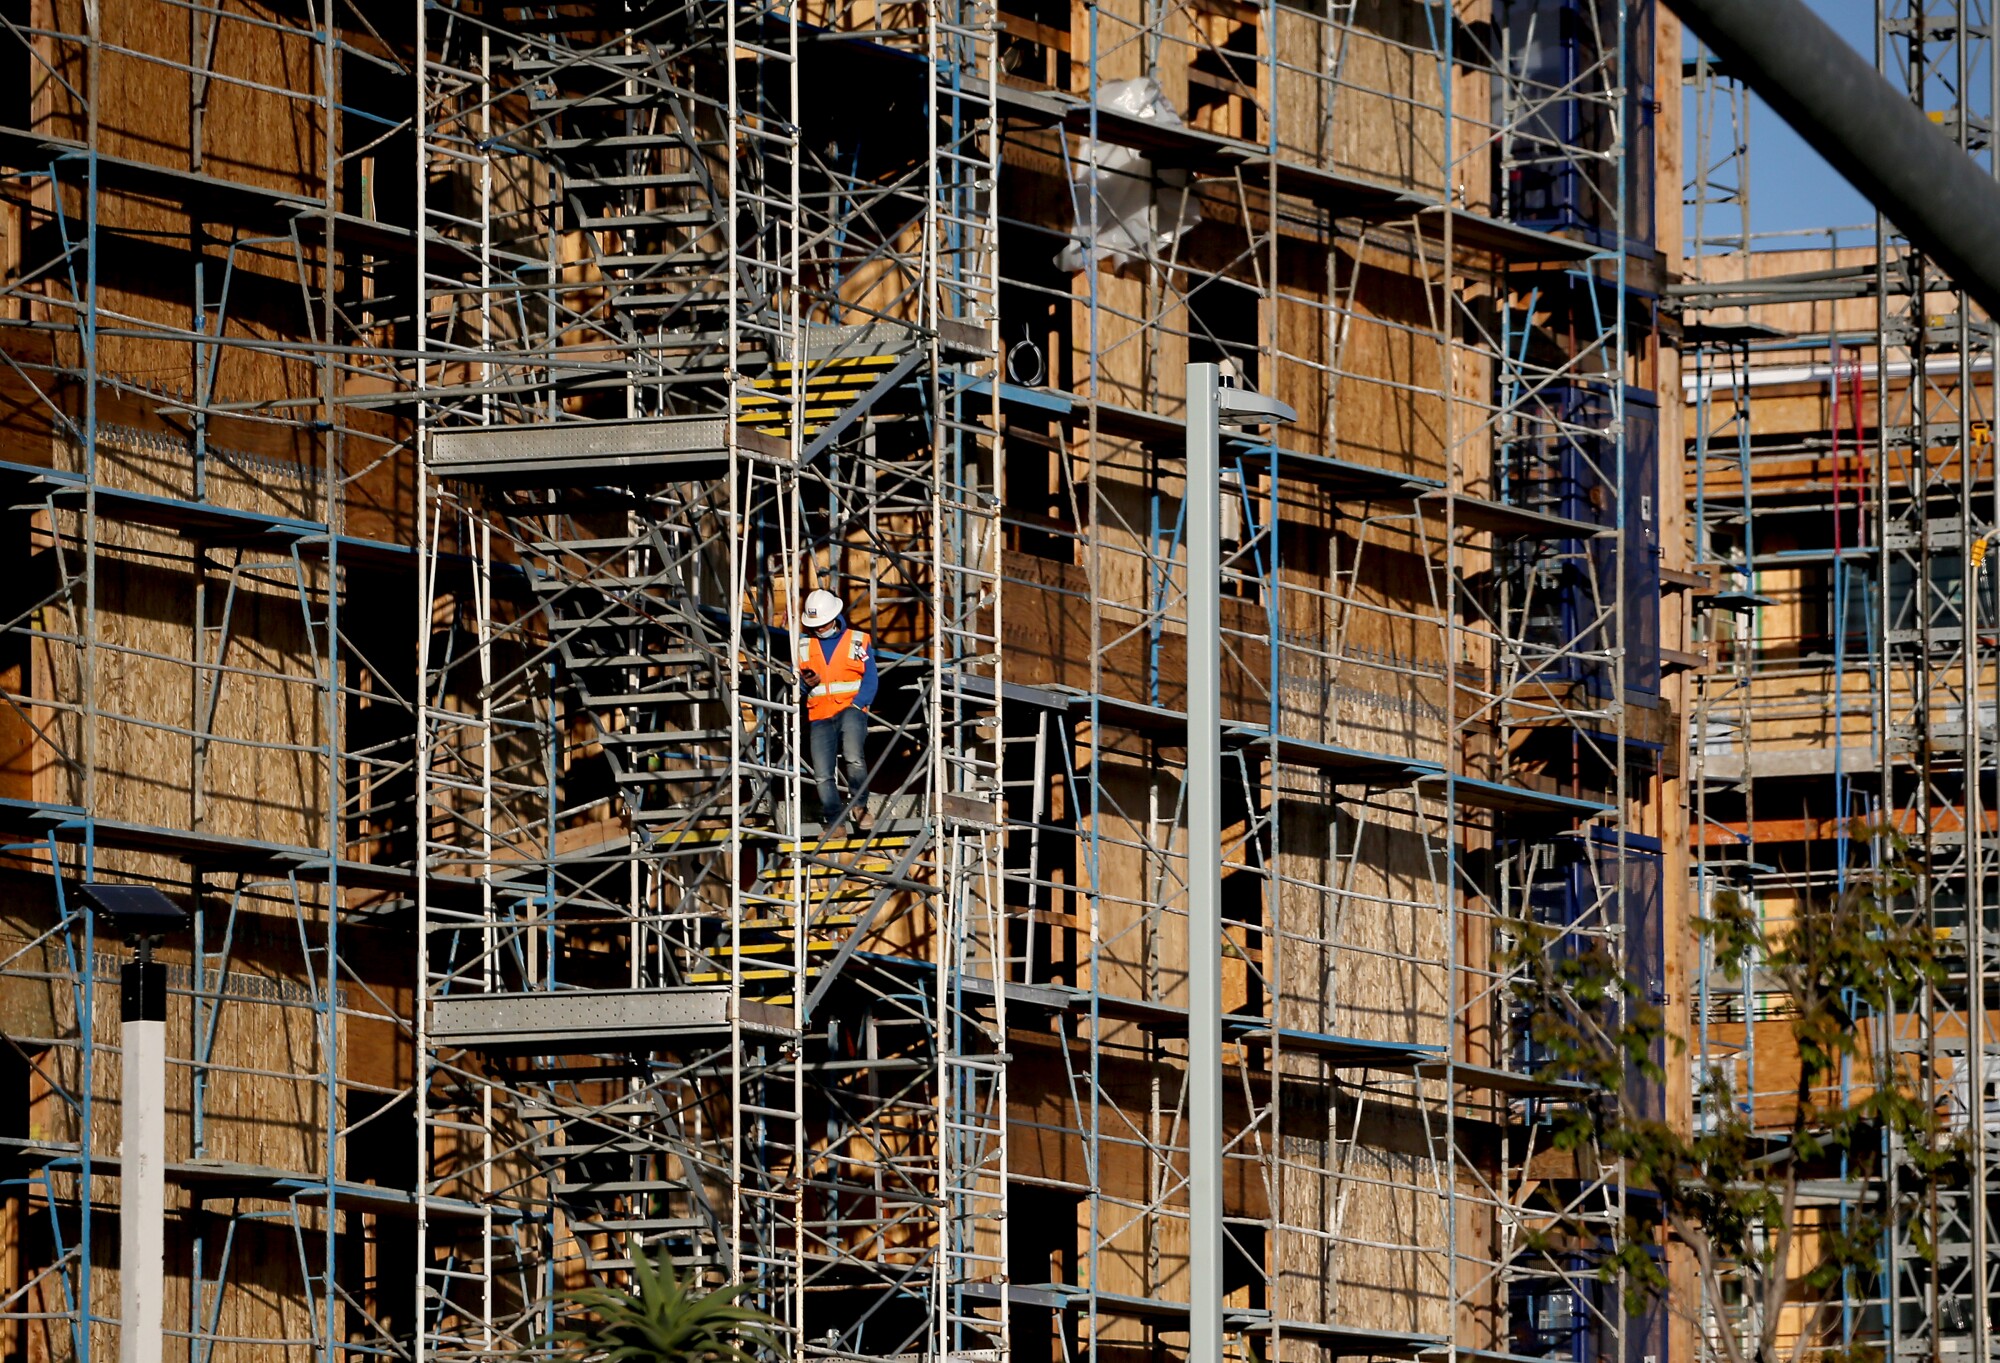 Construction workers on scaffolding outside a large building